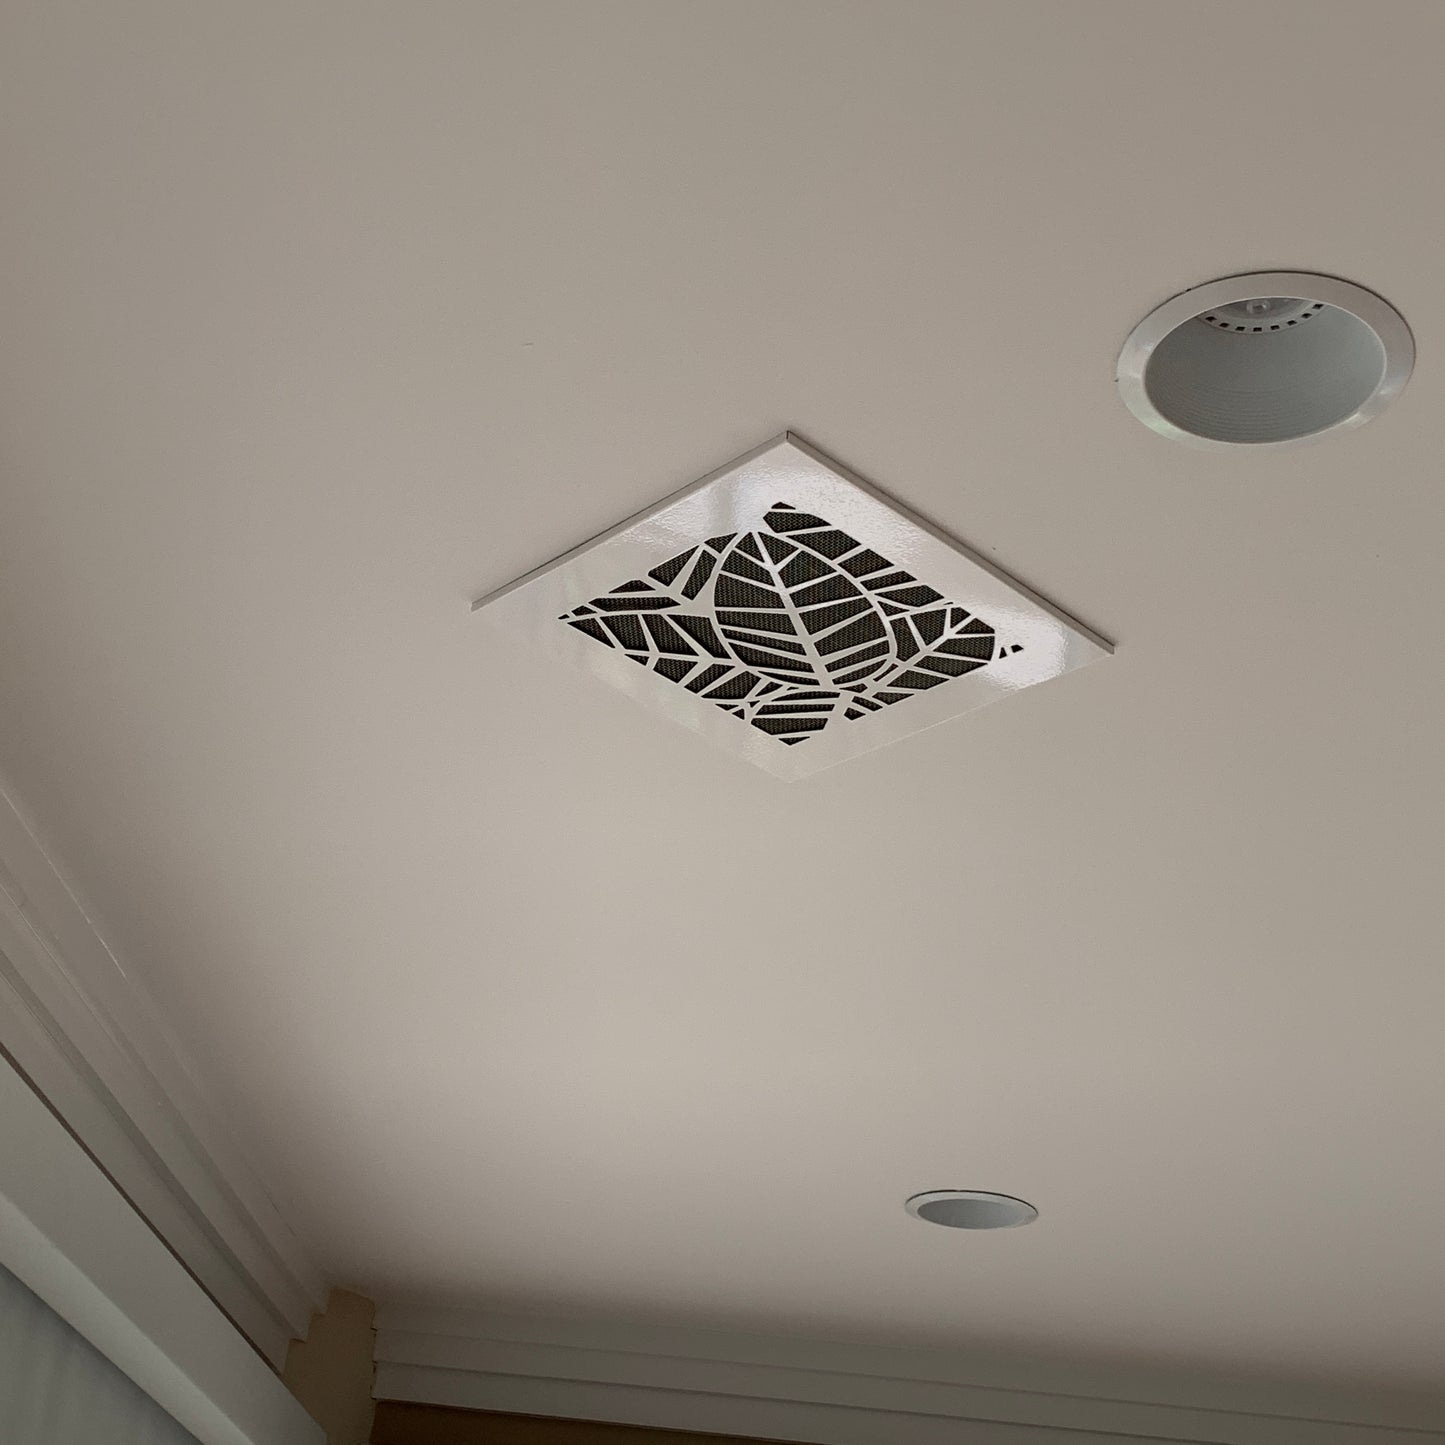 AC ceiling vent - CleanVent Tropical Pattern